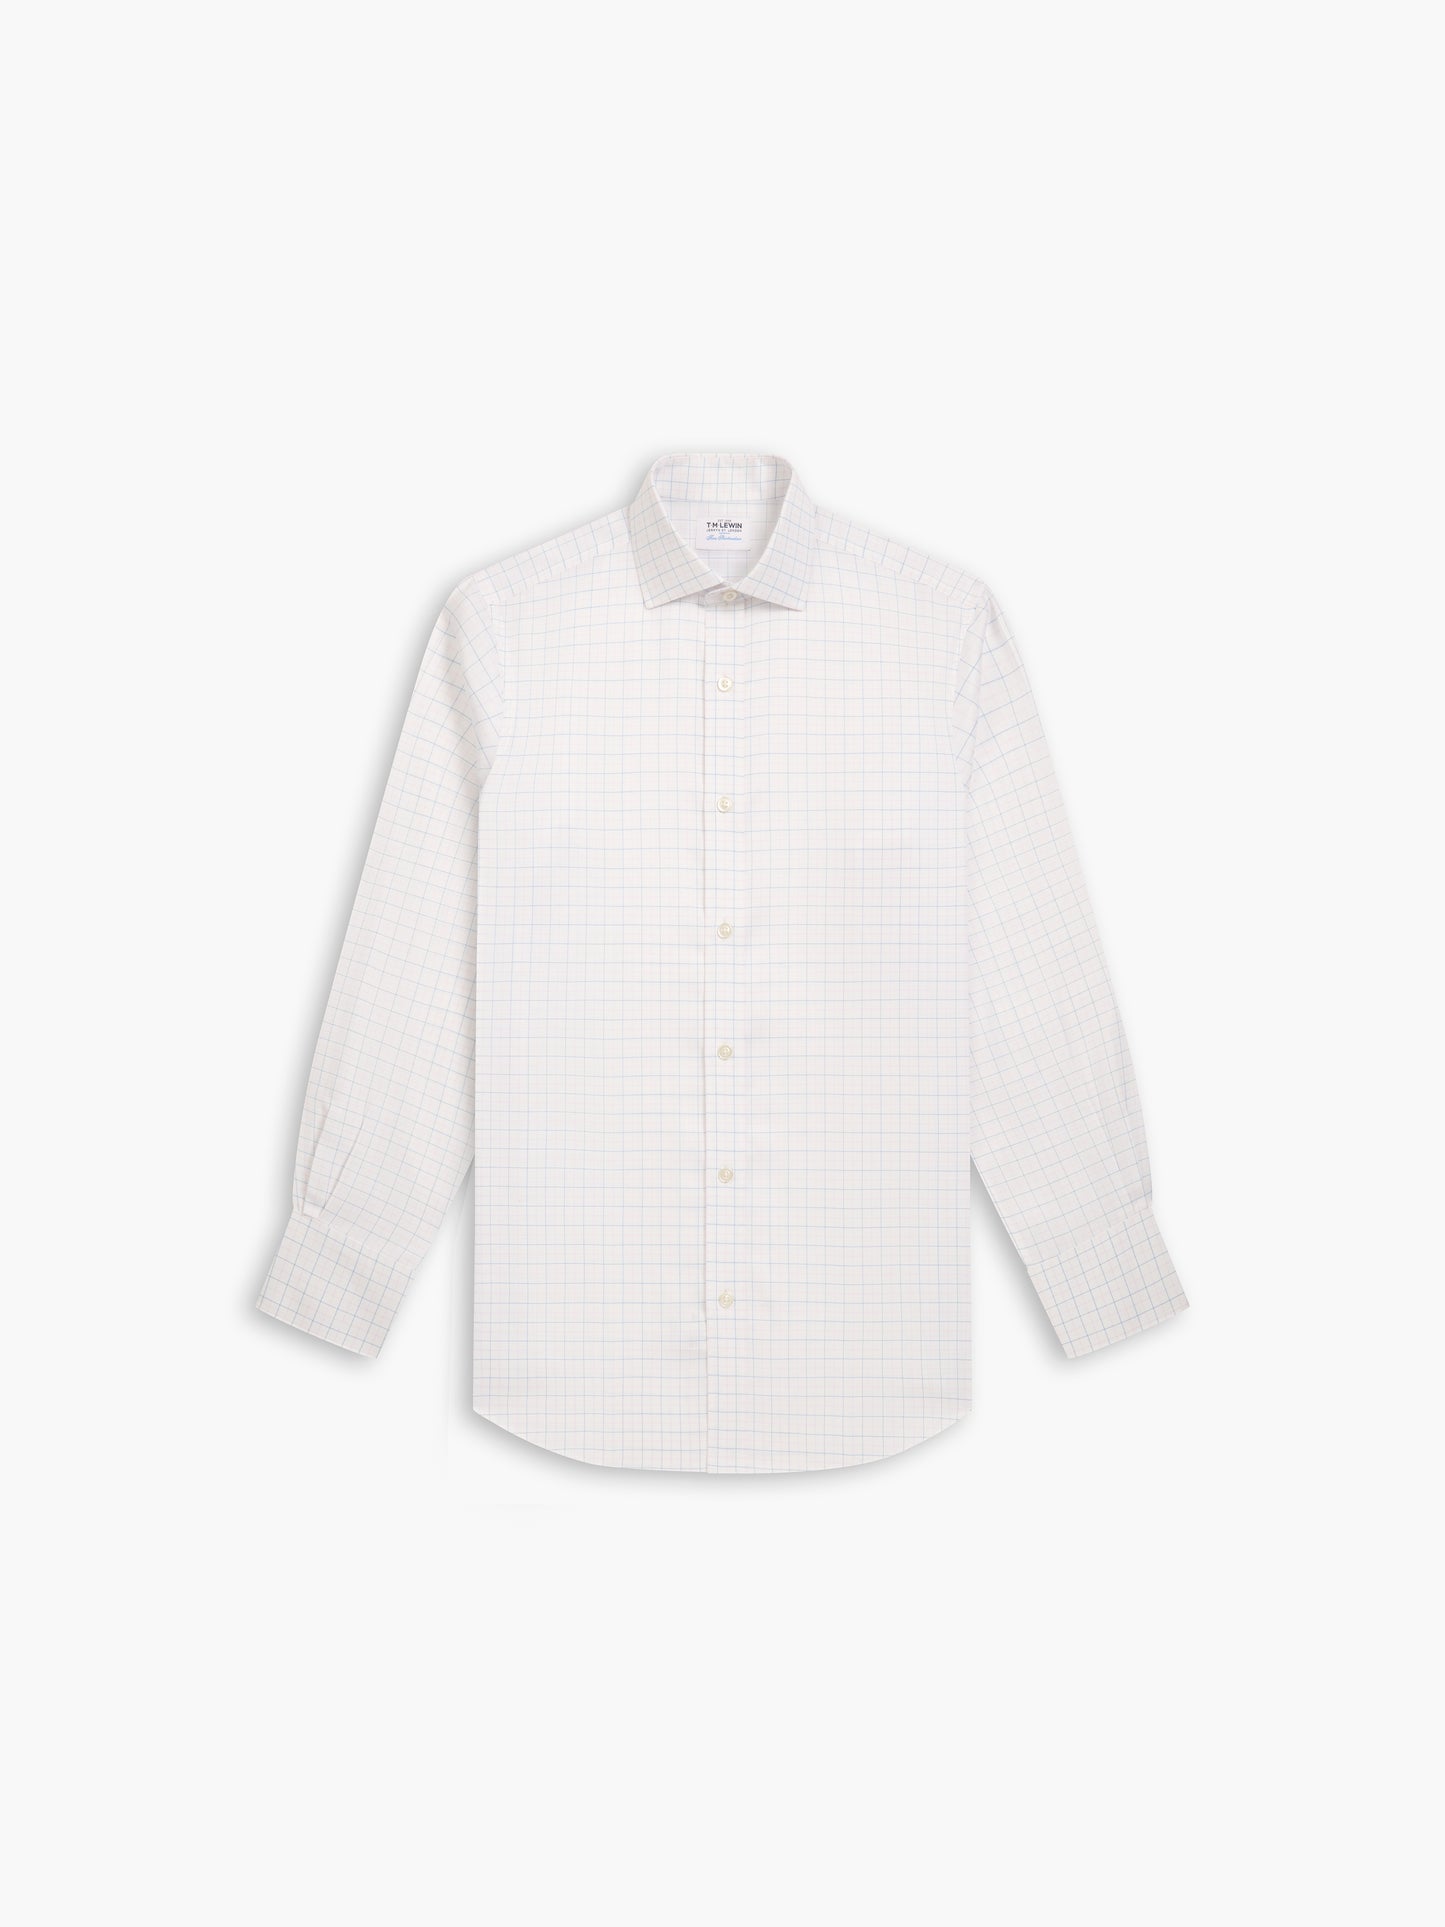 Image 2 of Non-Iron Blue & Pink Double Check Oxford Super Fitted Single Cuff Classic Collar Shirt